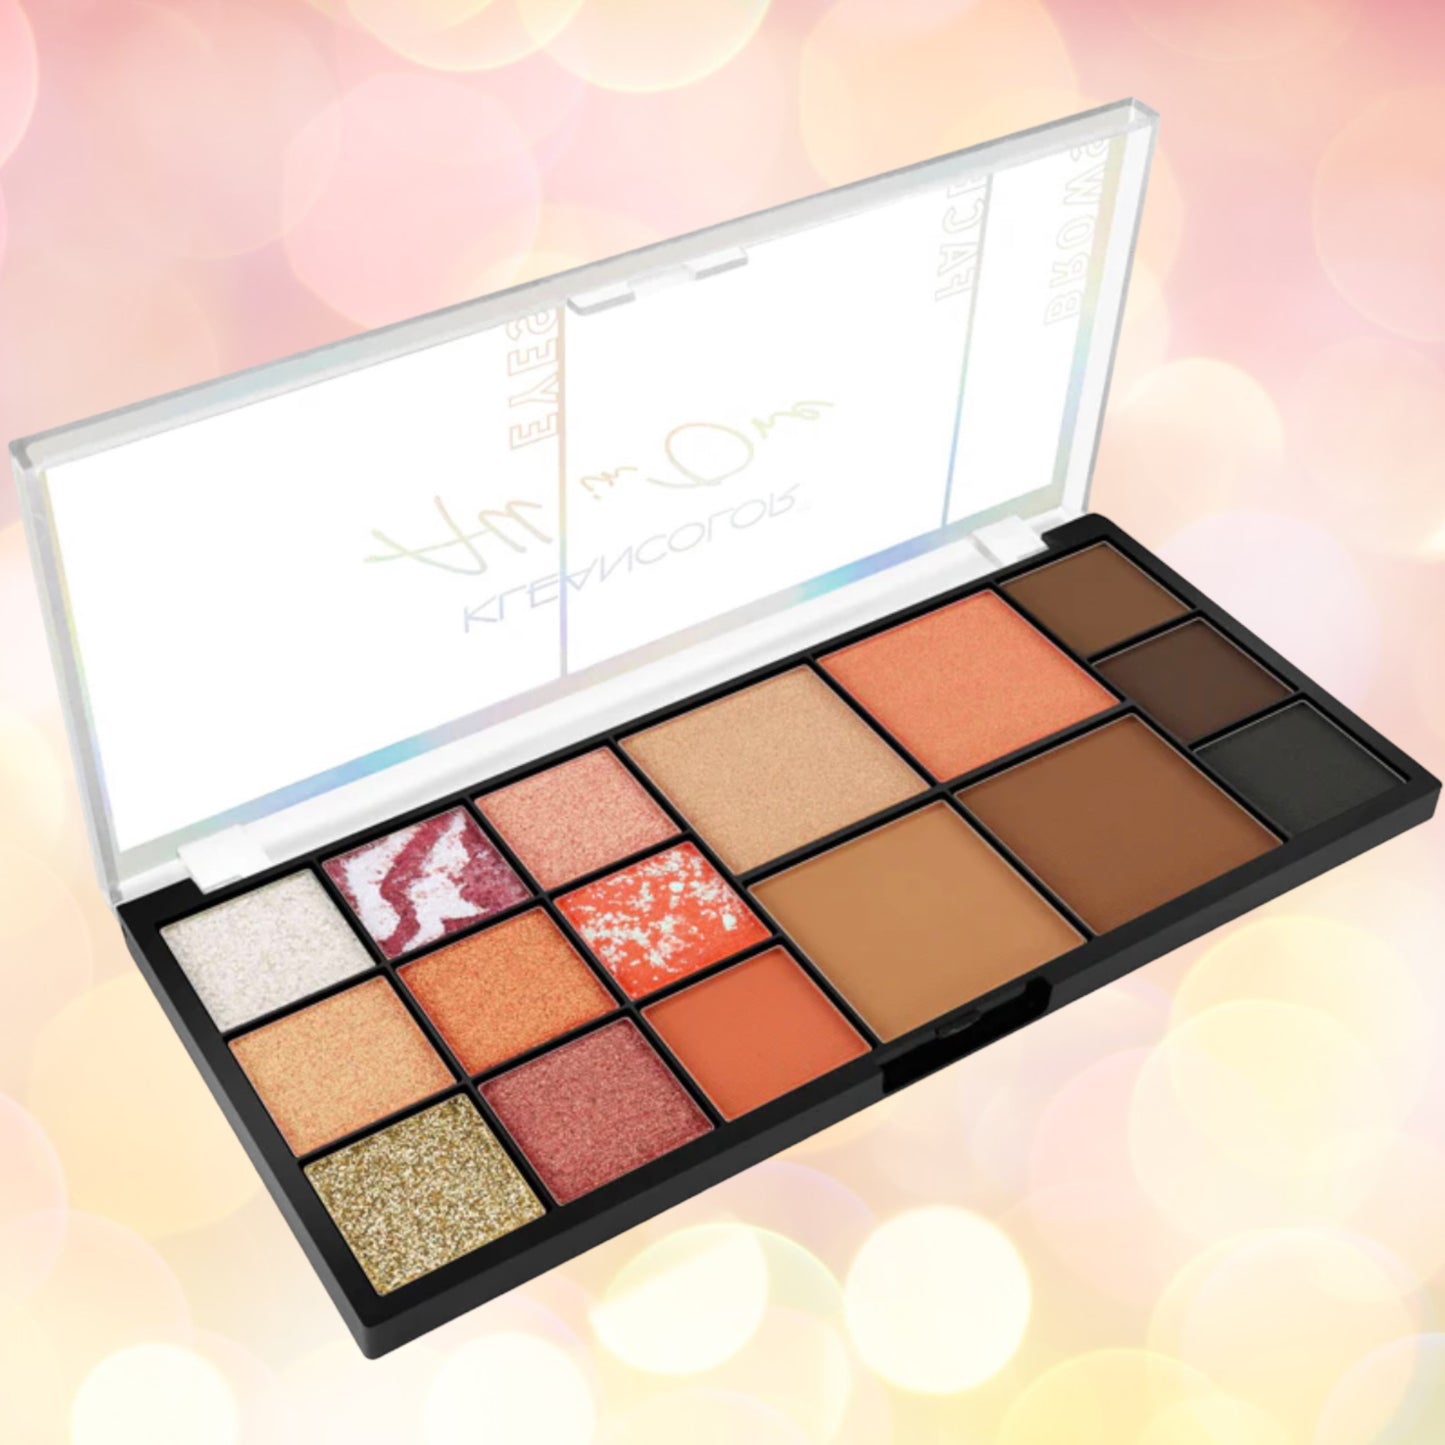 All In One Face, Eye & Brow Palette